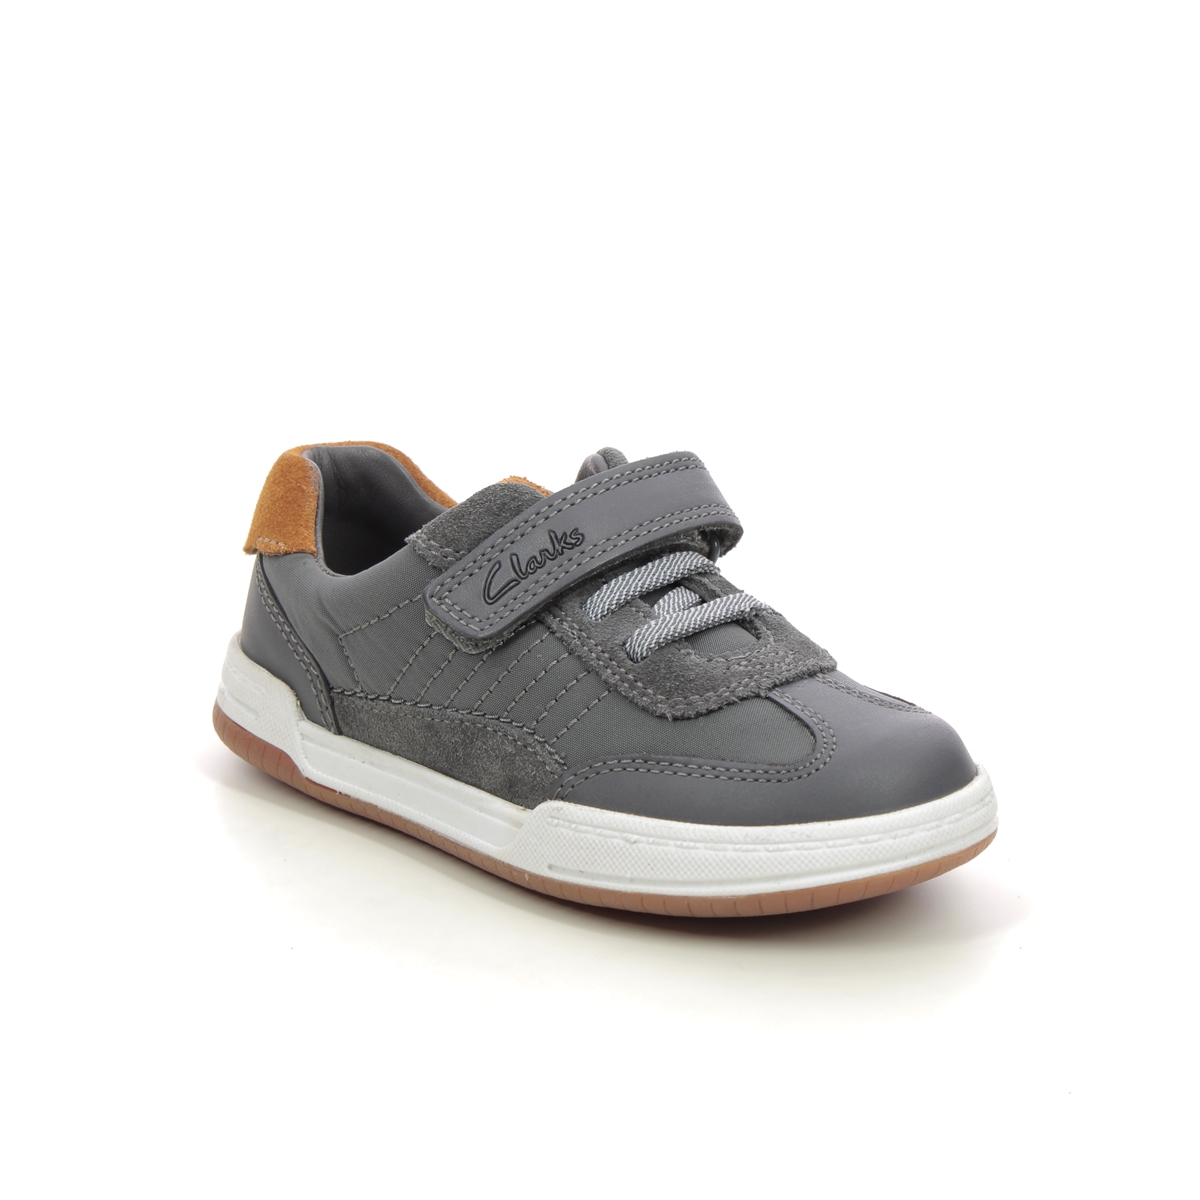 Clarks Family K F Fit Grey Boys Toddler Shoes